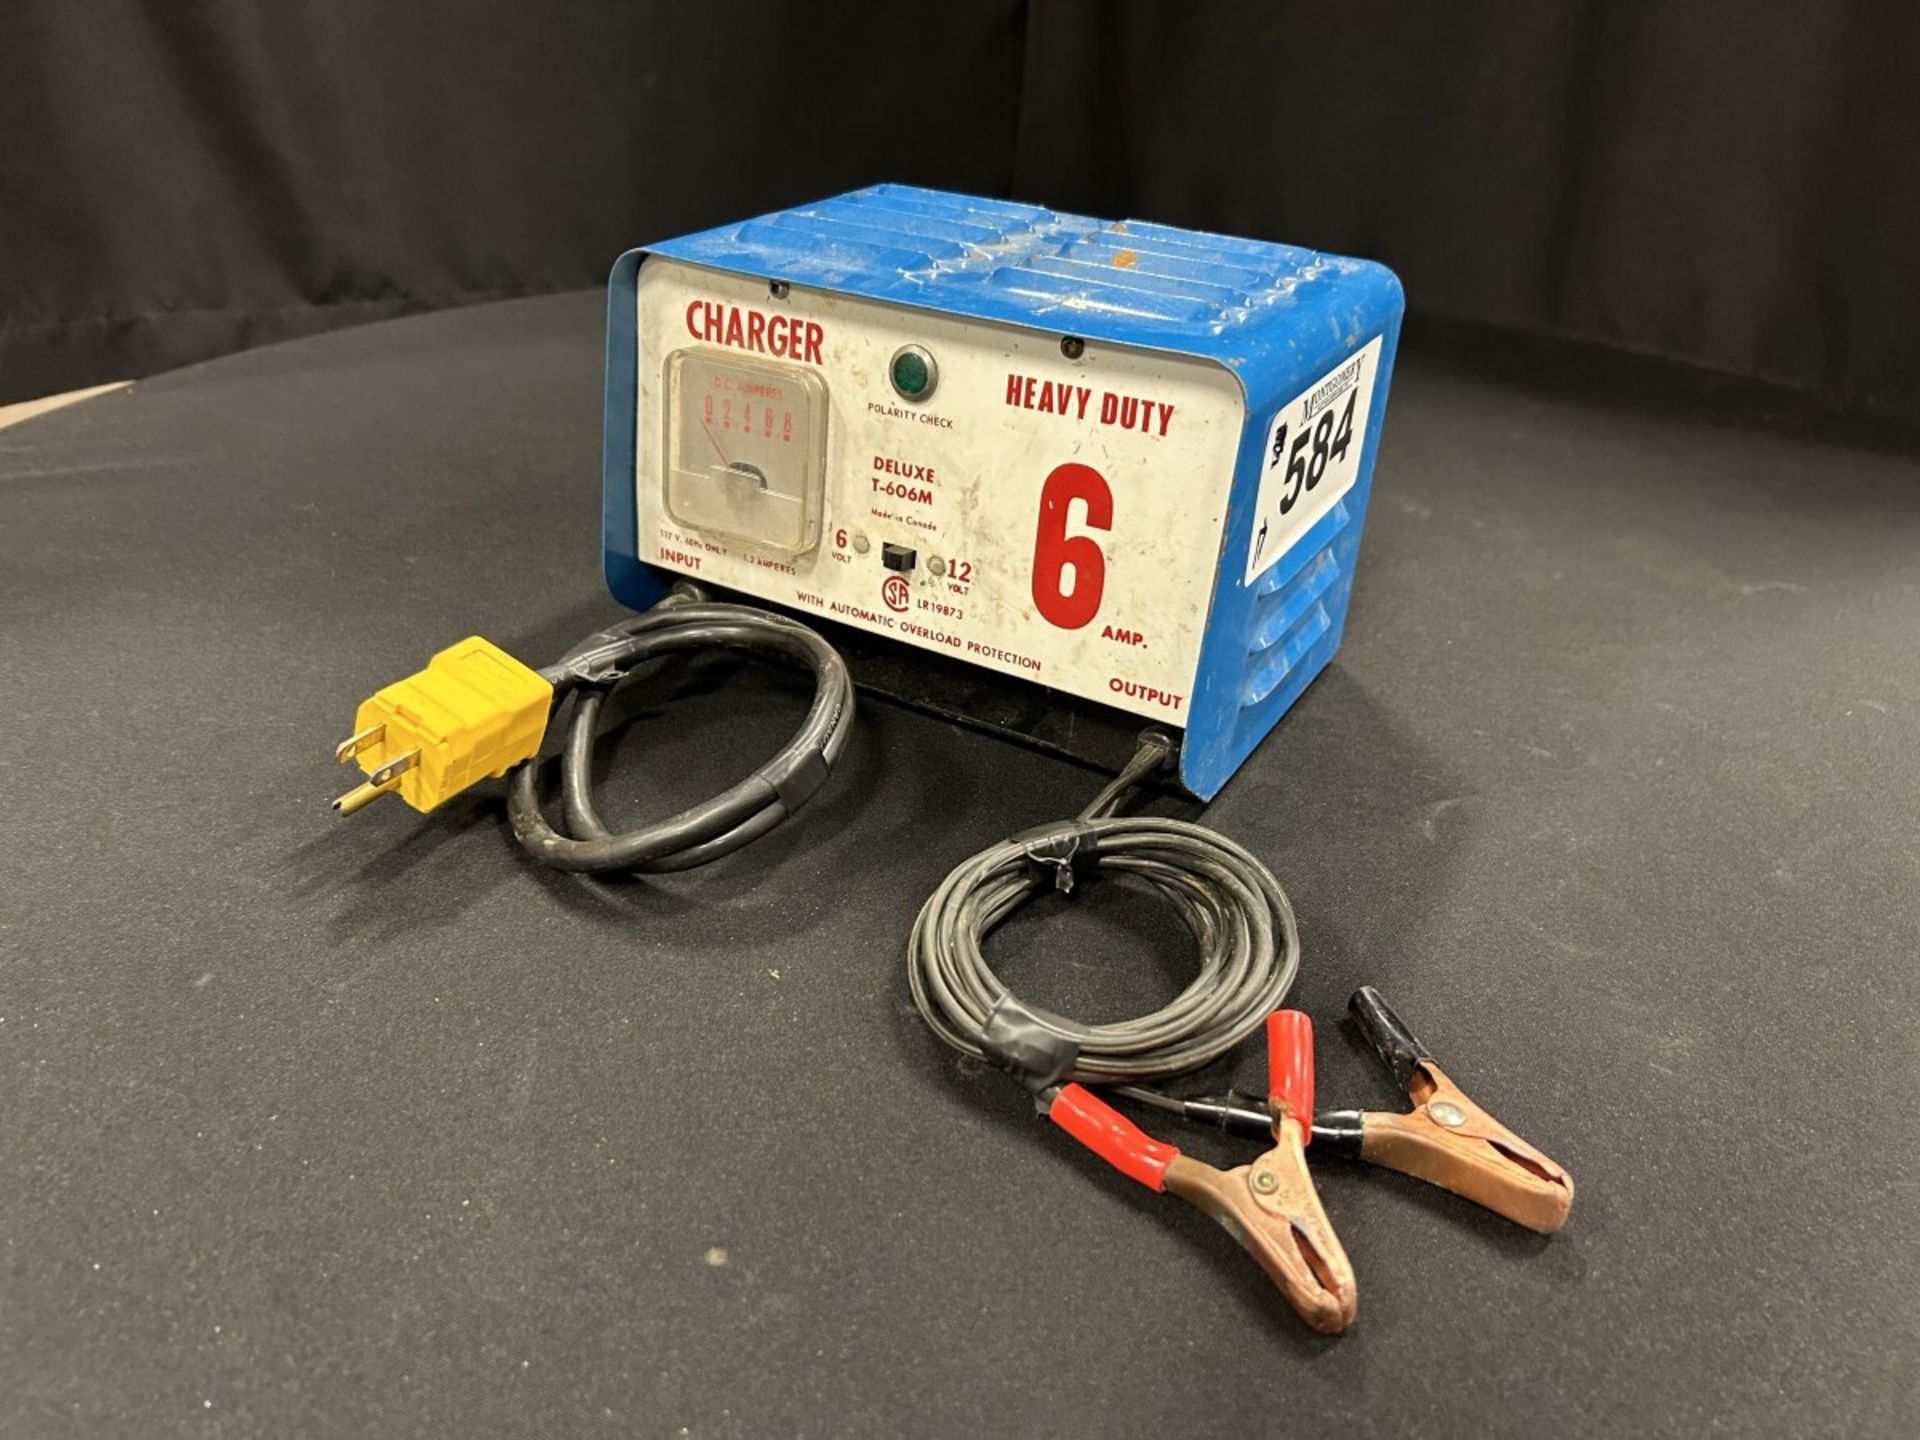 HEAVY DUTY 6 AMP CHARGER MODEL:T-606M